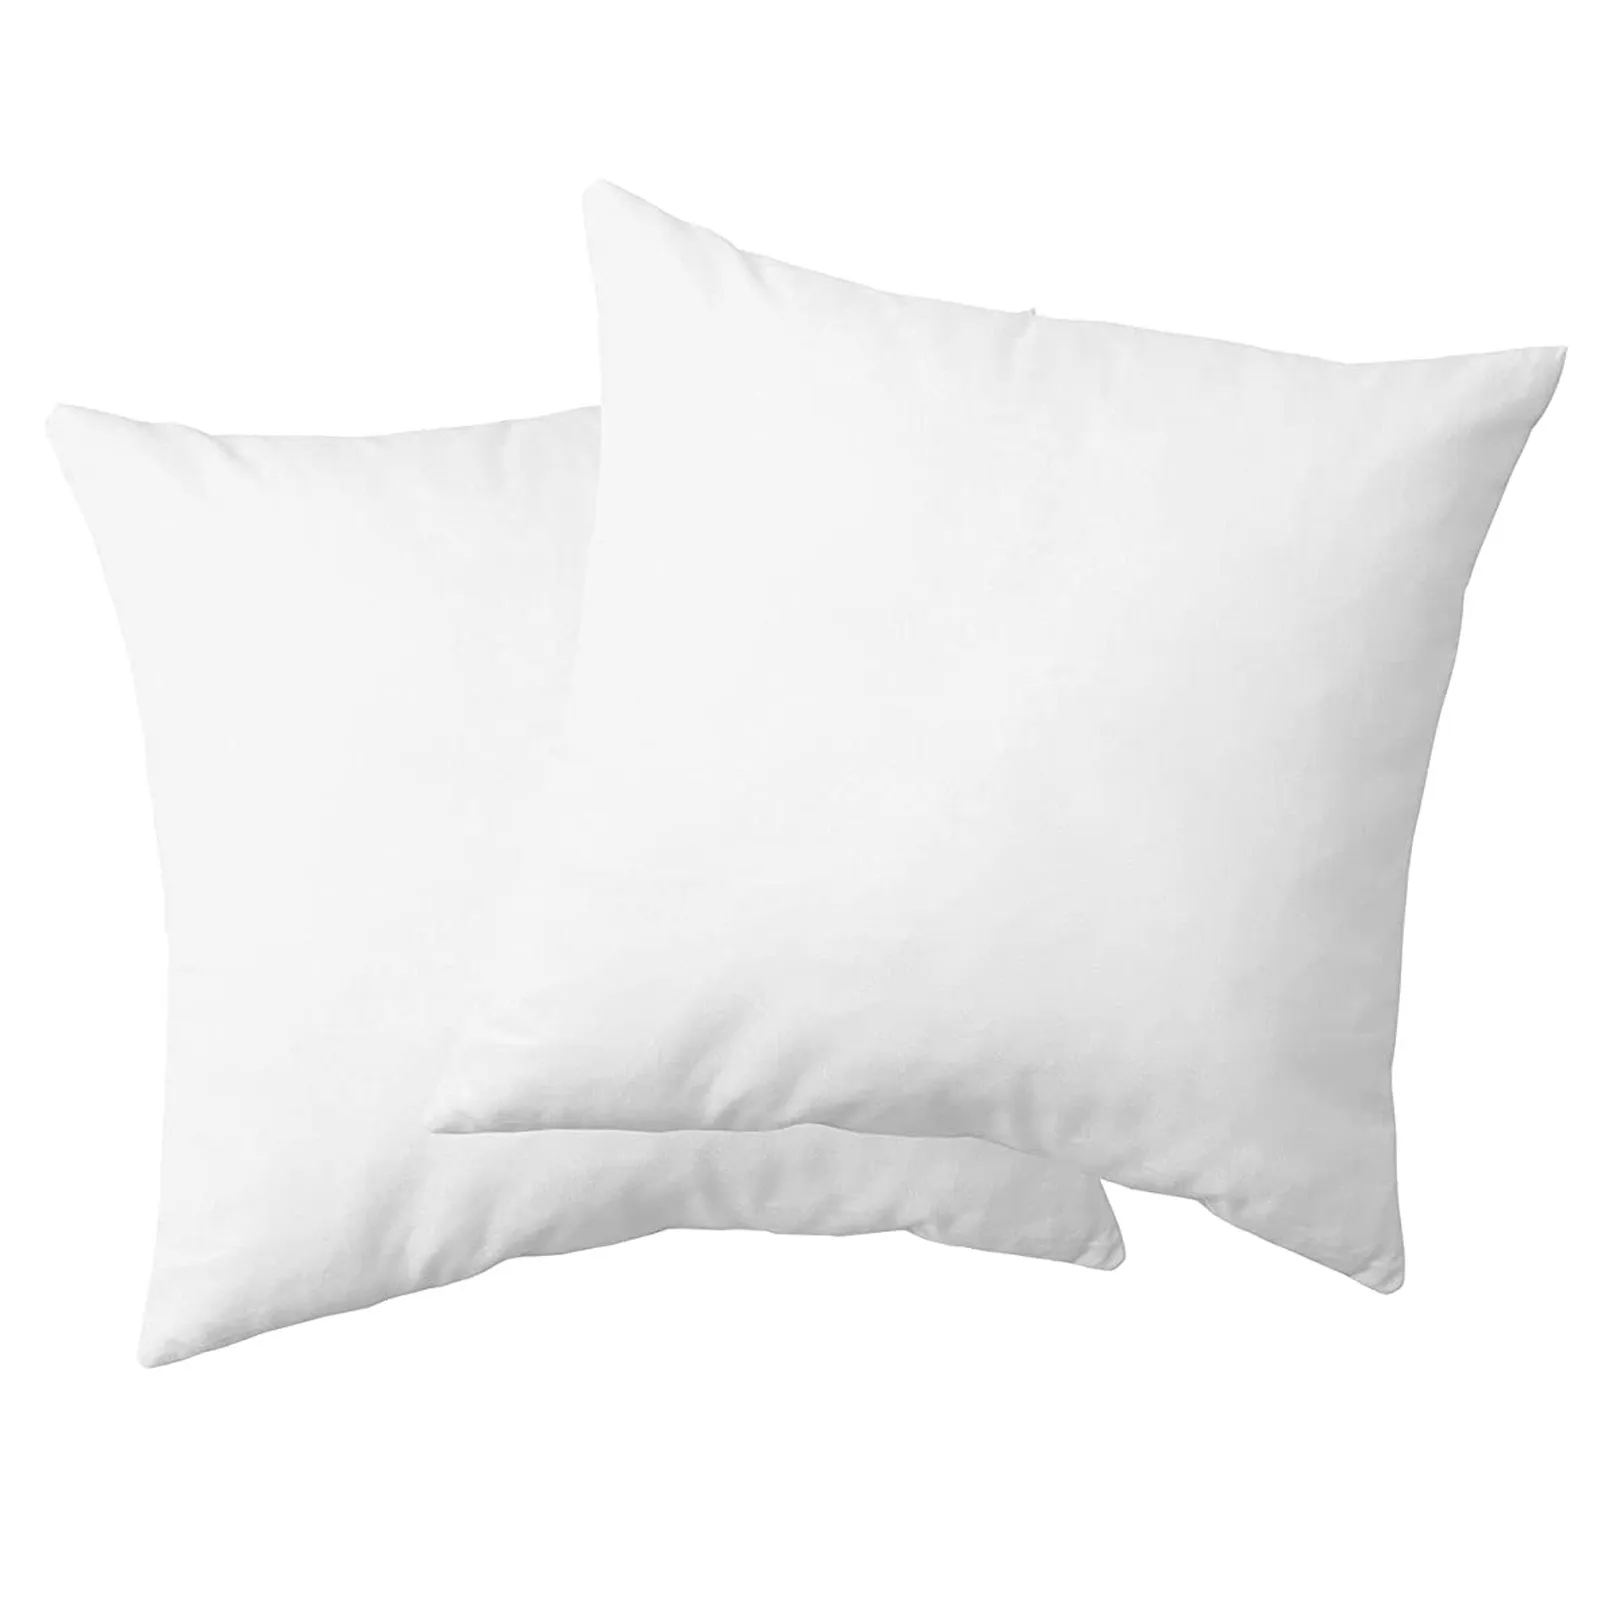 Anti dustmite Smilikee 2pcs Waterproof Pillow Cover White Stain Resistant Zipped Pillow Guard Protectors 20×26 